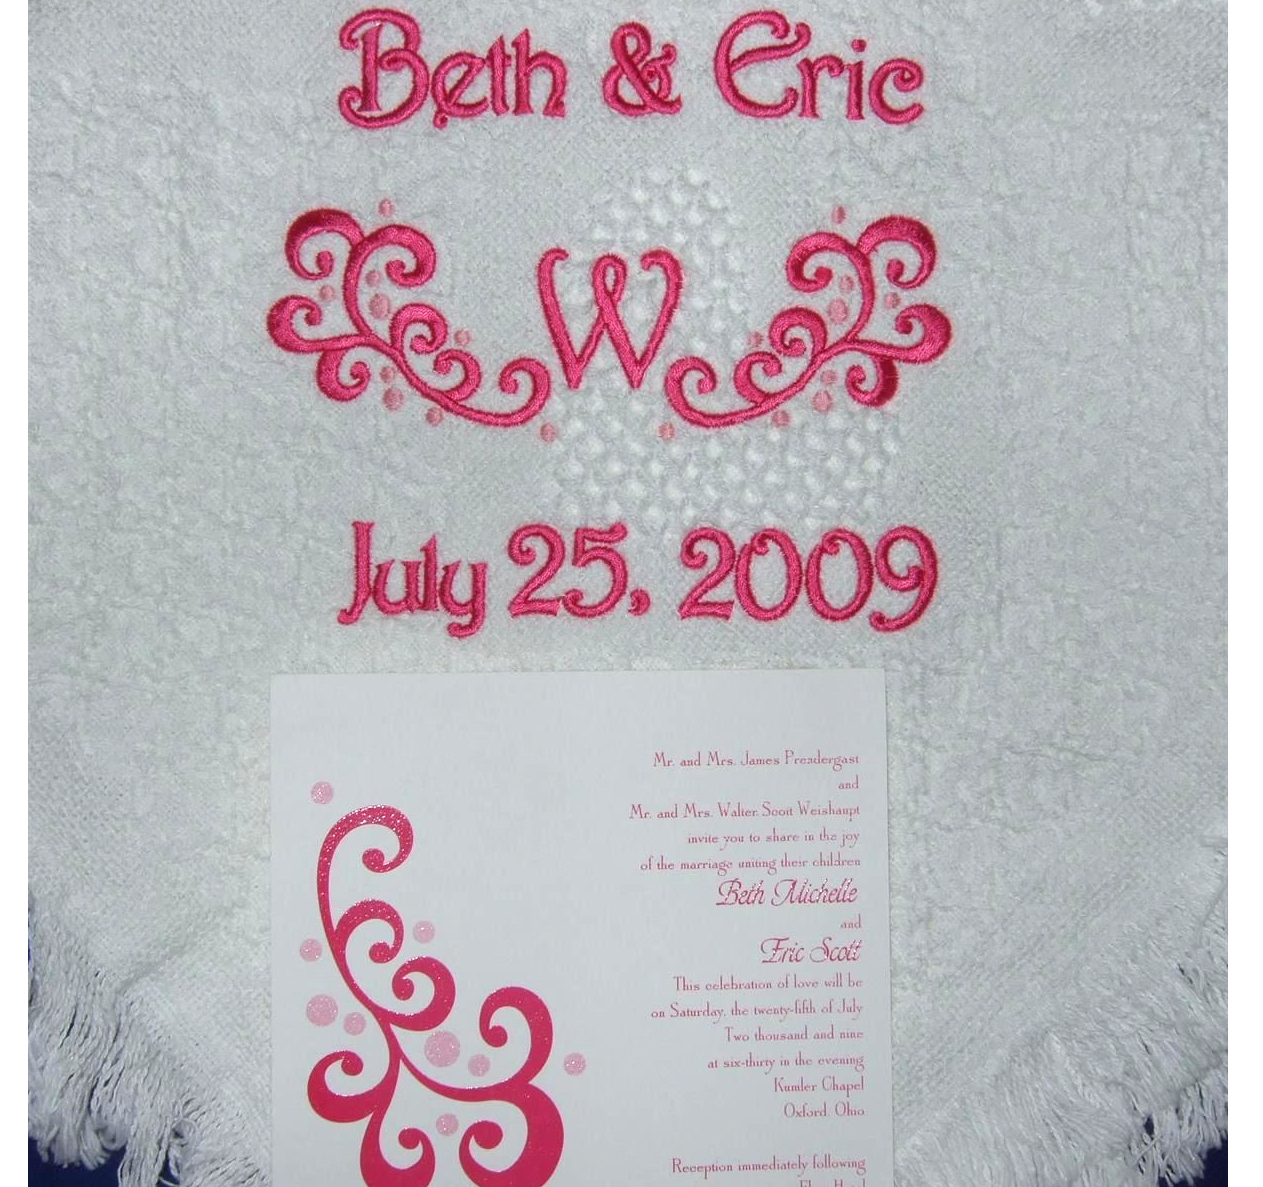 Woven heart wedding blanket with scroll and dots from wedding invitation